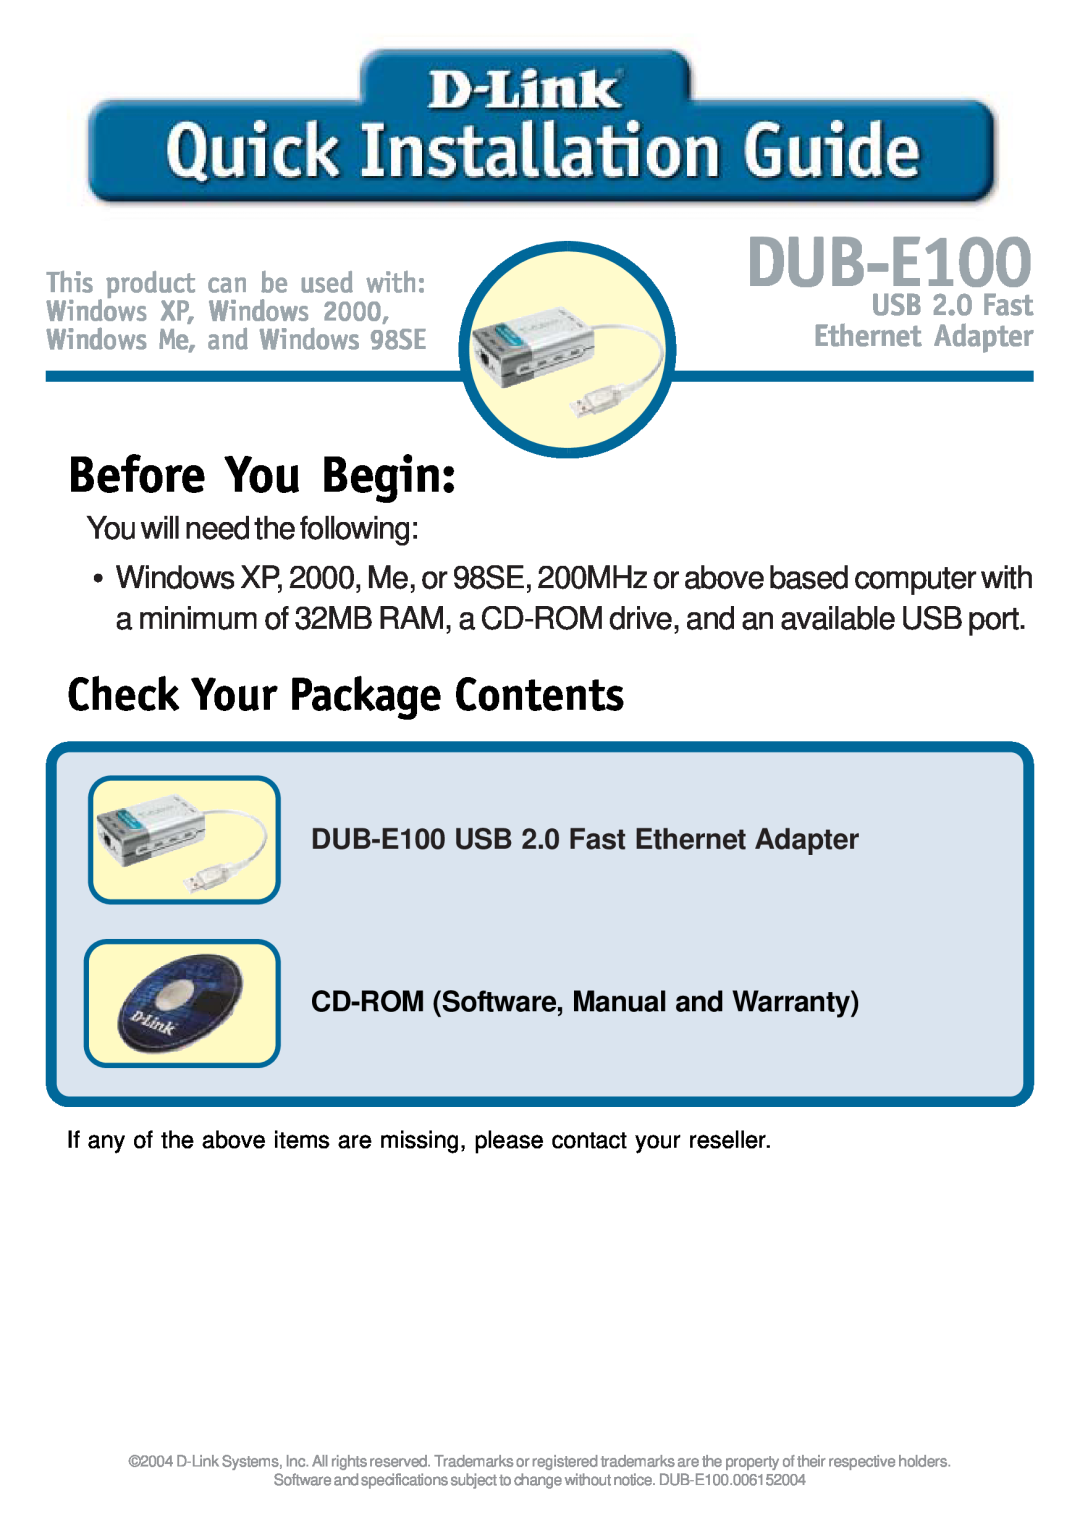 D-Link DUB-E100 specifications Before You Begin, Check Your Package Contents, You will need the following 